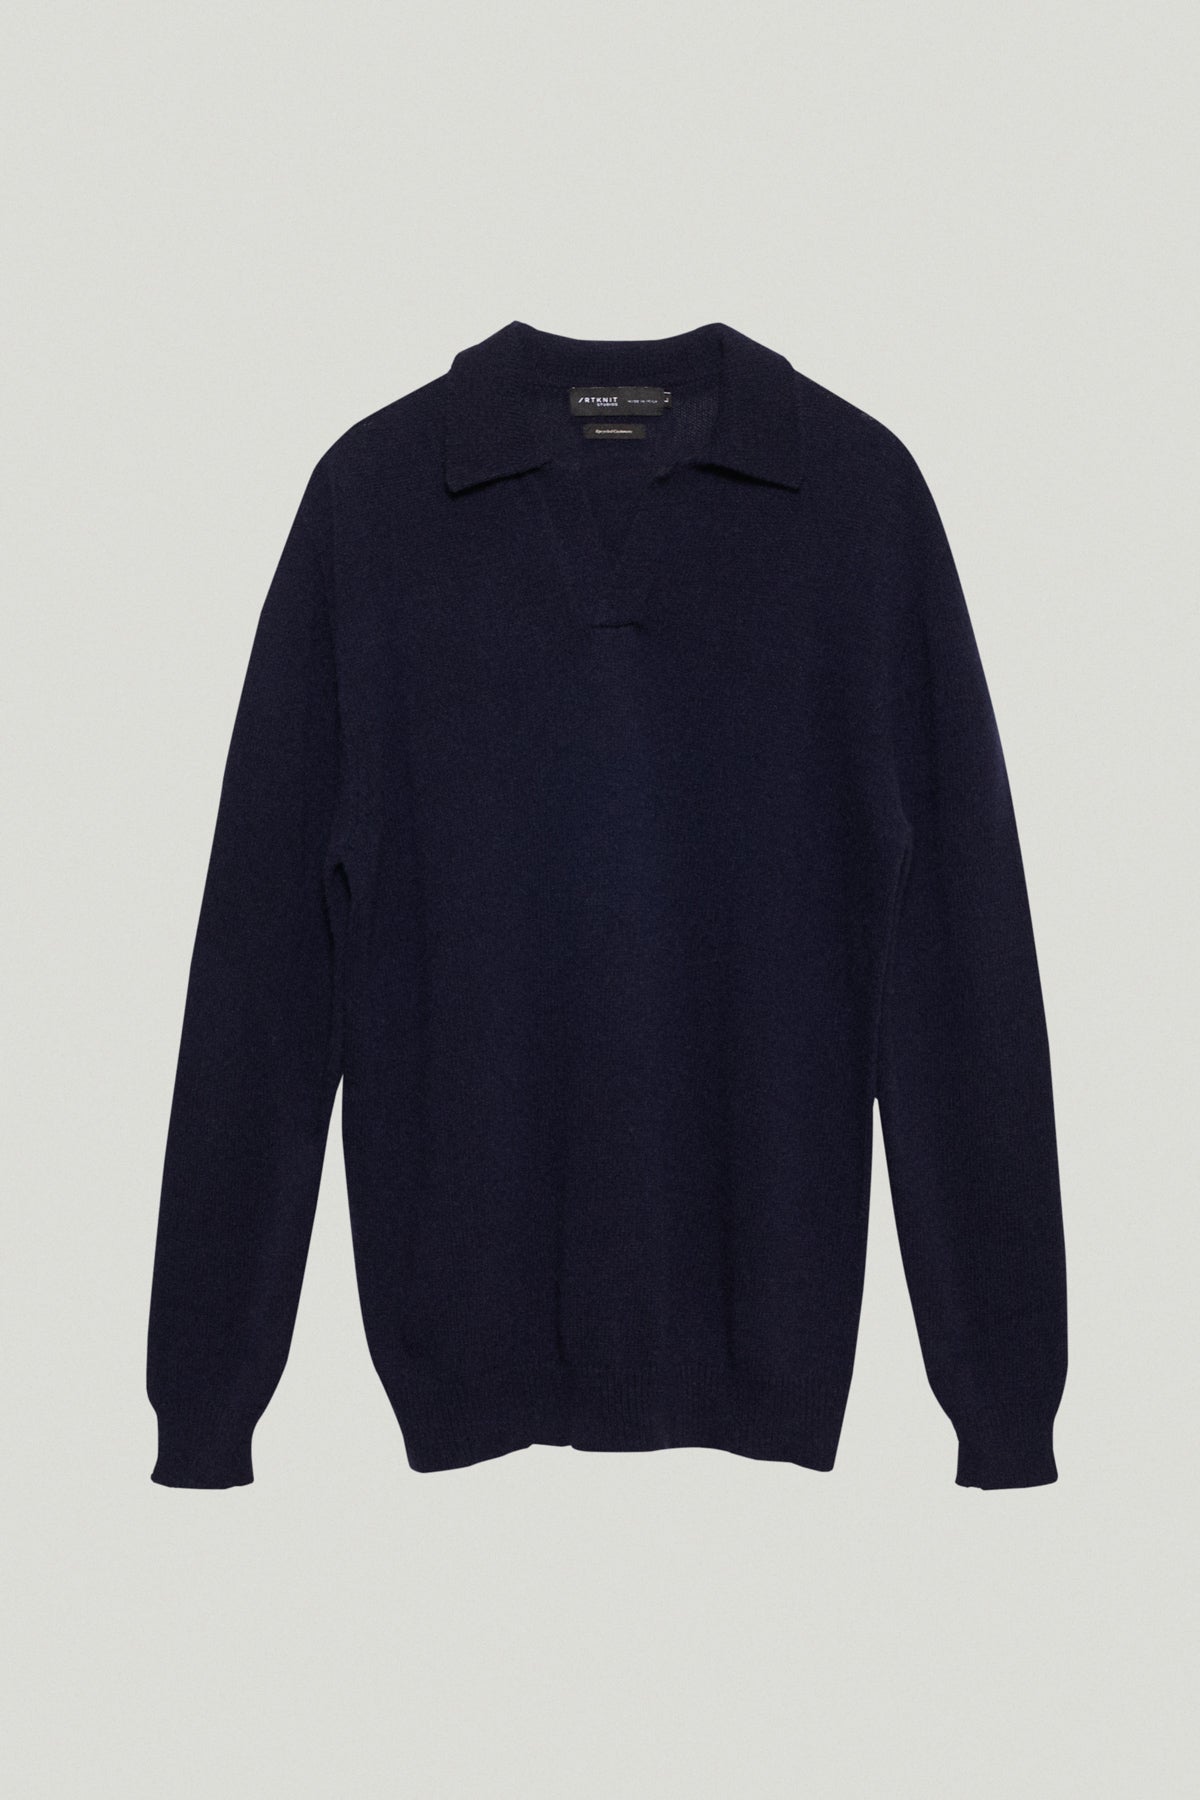 Blue Navy | The Upcycled Cashmere Polo – Imperfect Version